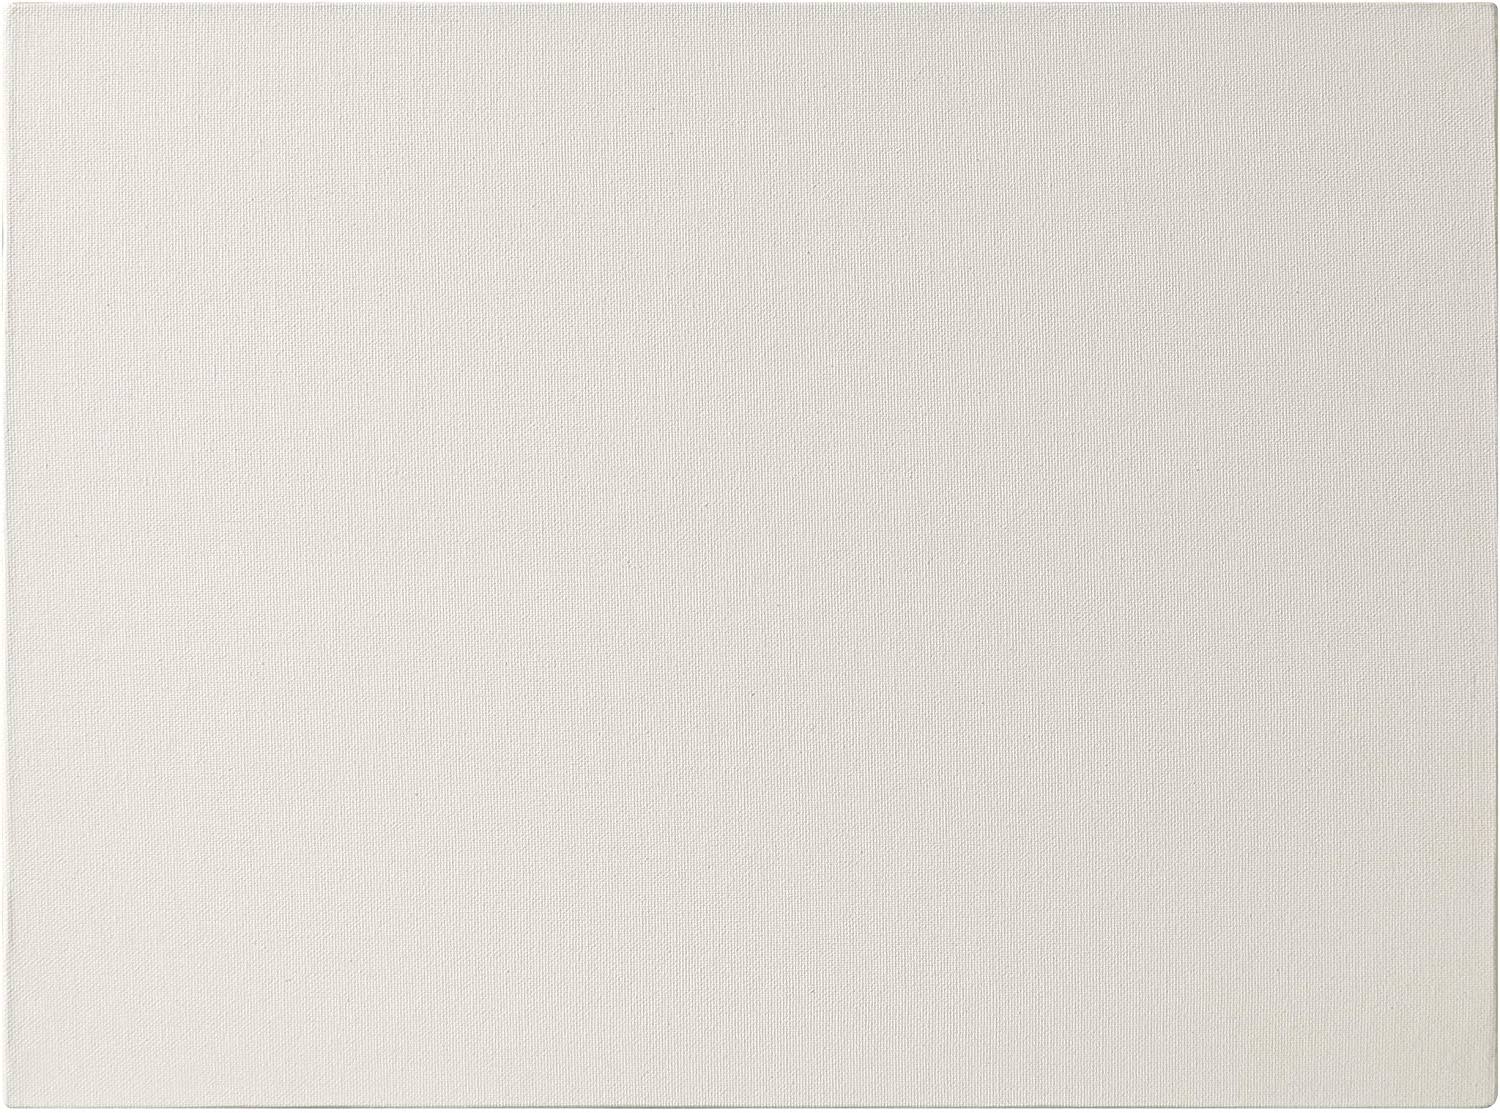 Square 3 mm Thick Clairefontaine White Canvas Board 10 x 10 cm 